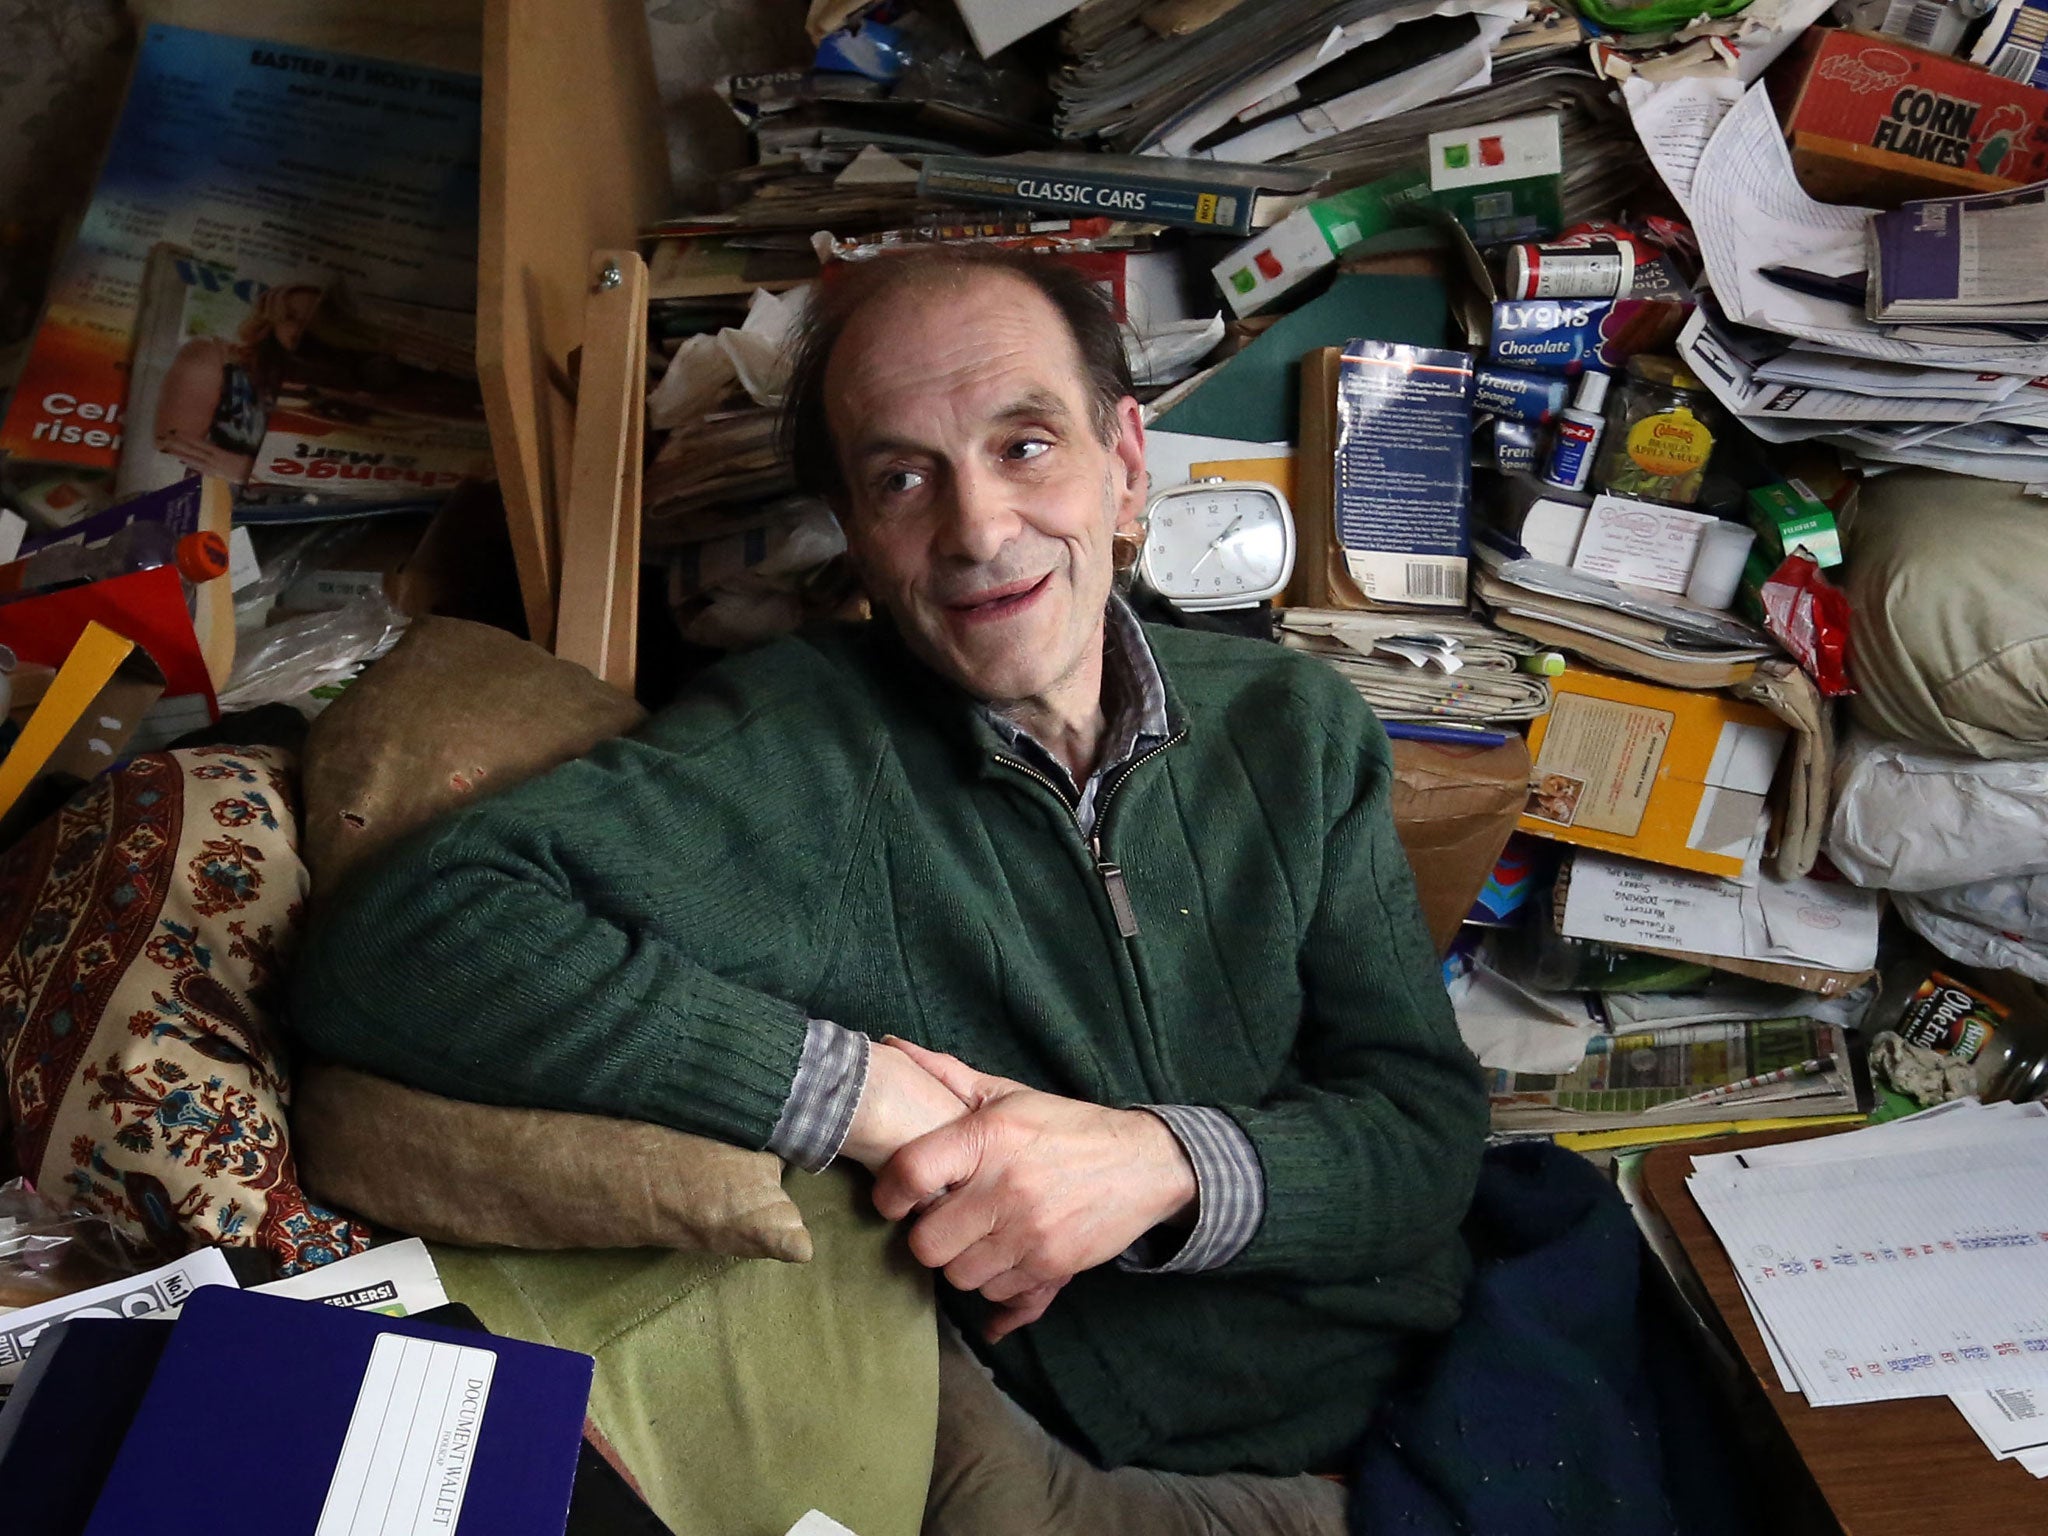 Job lot: Richard Wallace with a part of his collection in his bedroom/office